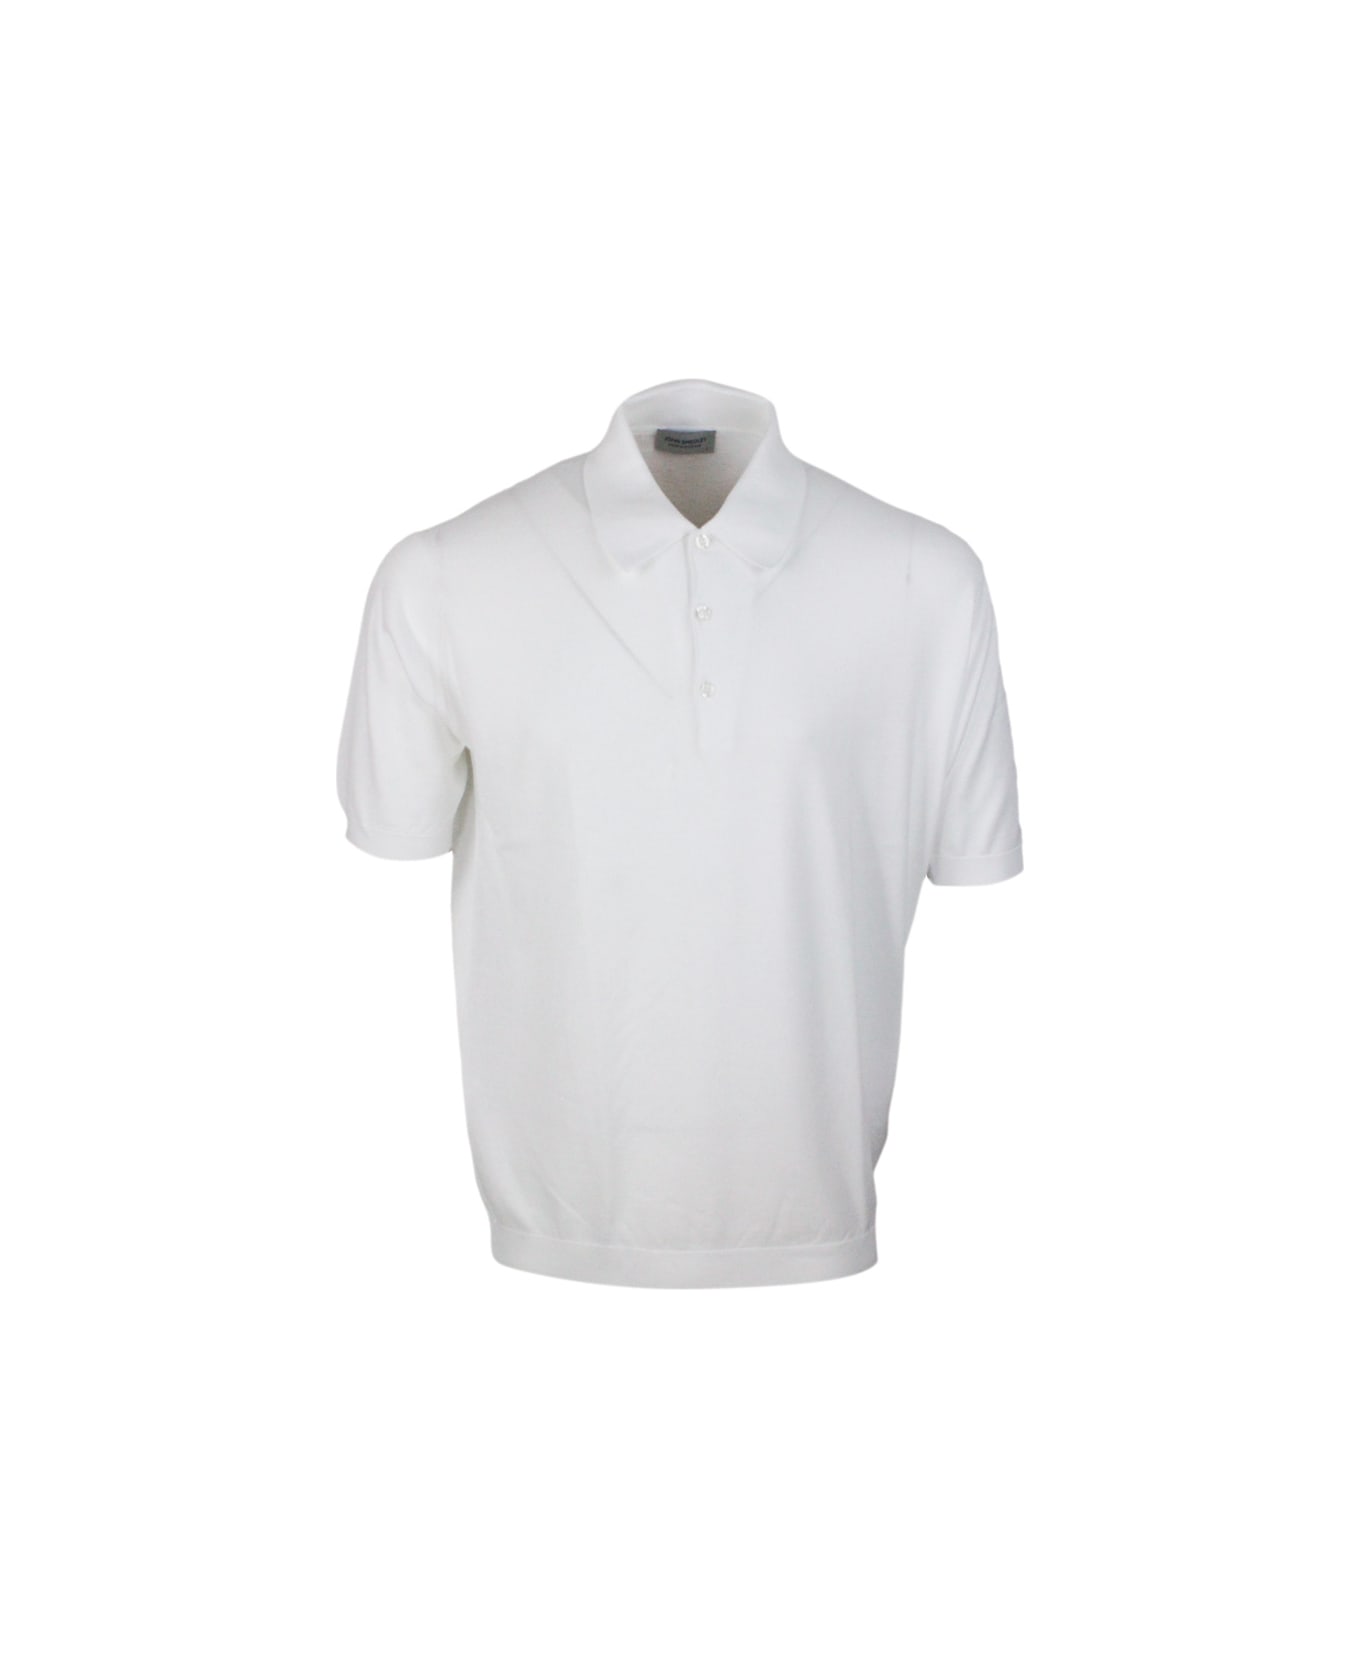 John Smedley Short-sleeved Polo Shirt In Extra-fine Cotton Thread With Three Buttons - White